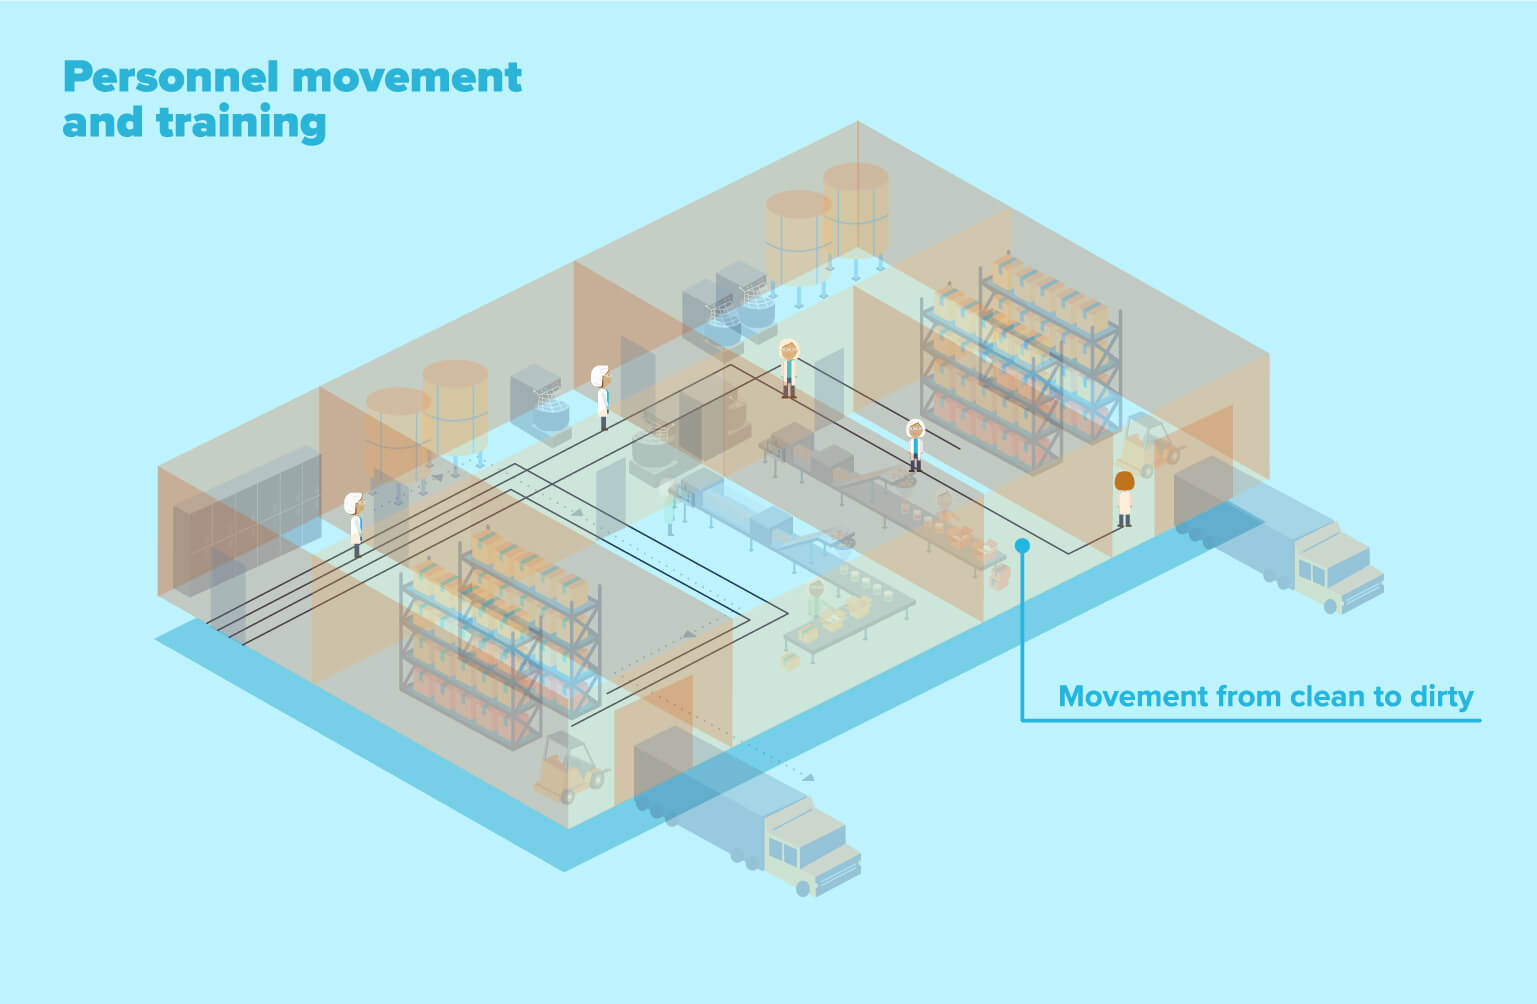 Training and personnel movement within a food manufacturing facility